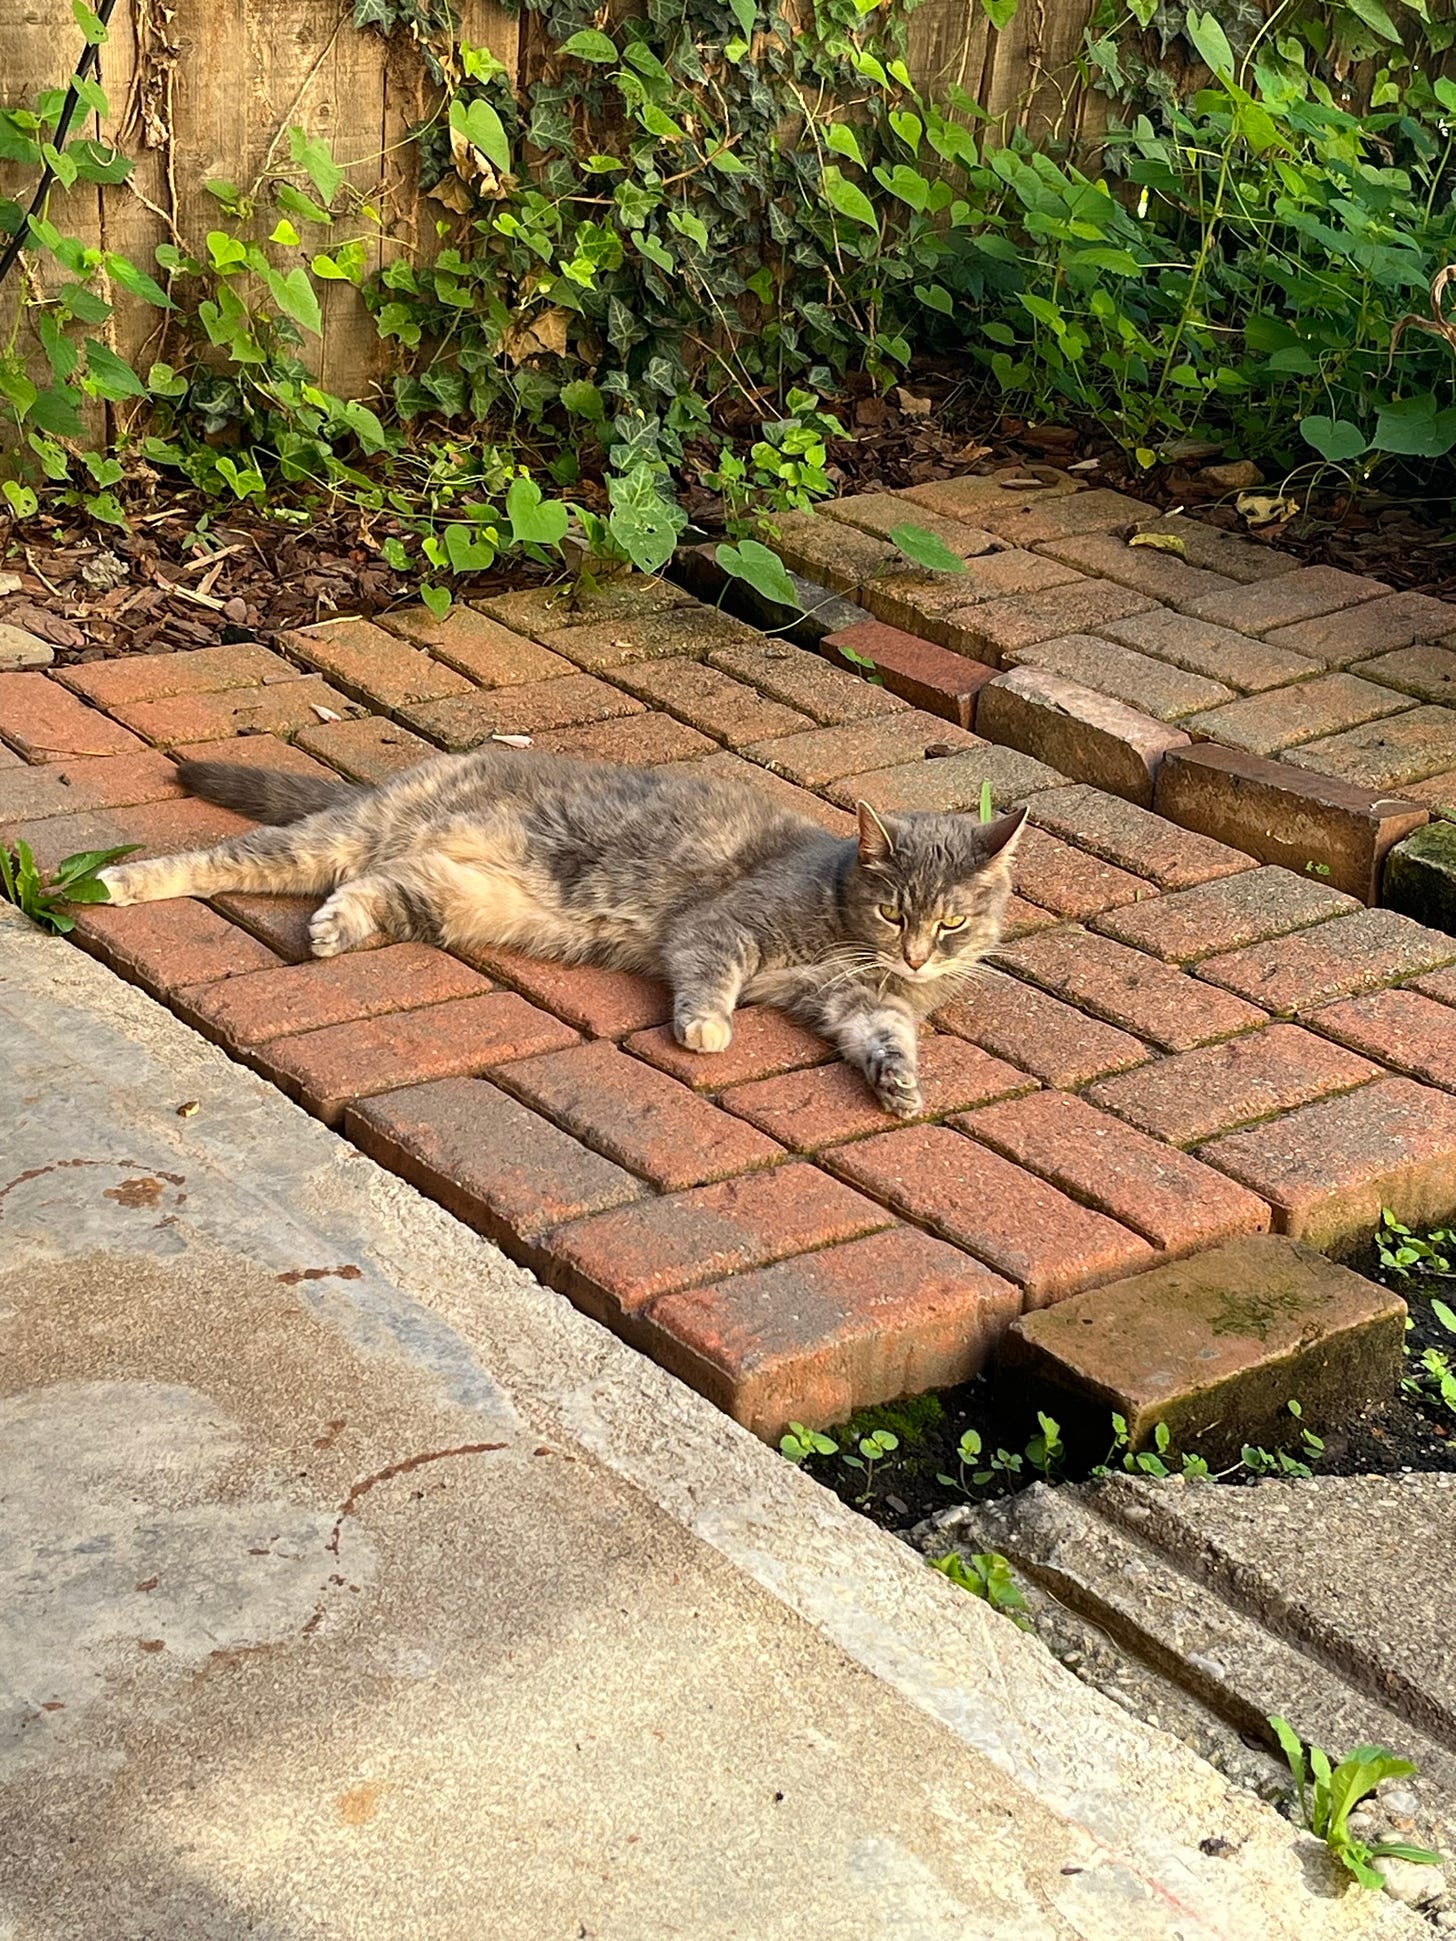 A dilute tortie cat sitting on a brick pavilion, looking quite relaxed, with many vines in the background